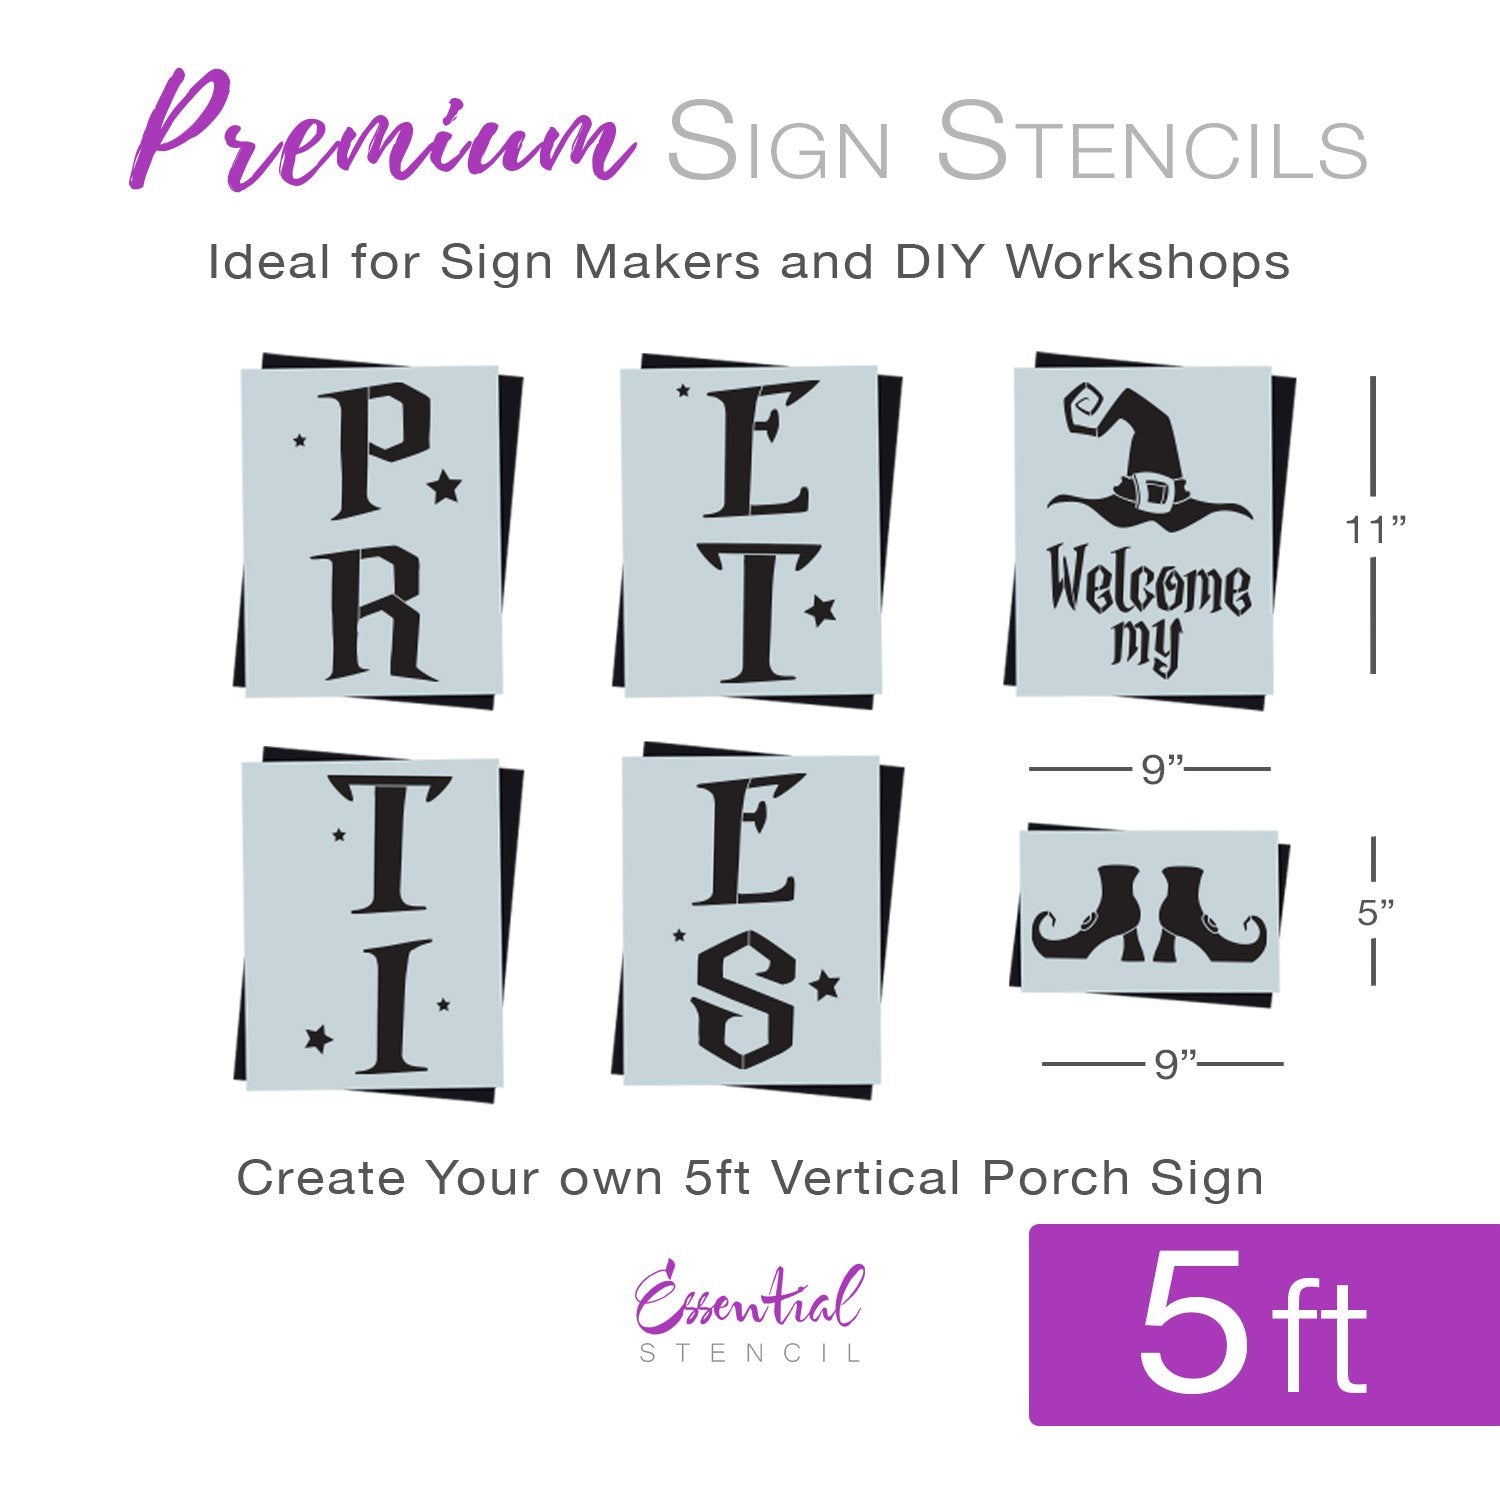 Welcome Stencils for Painting on Wood - 11 Pack Large Vertical Welcome Sign  Stencil Templates for Wood Signs, Reusable Letter Stencils for Home